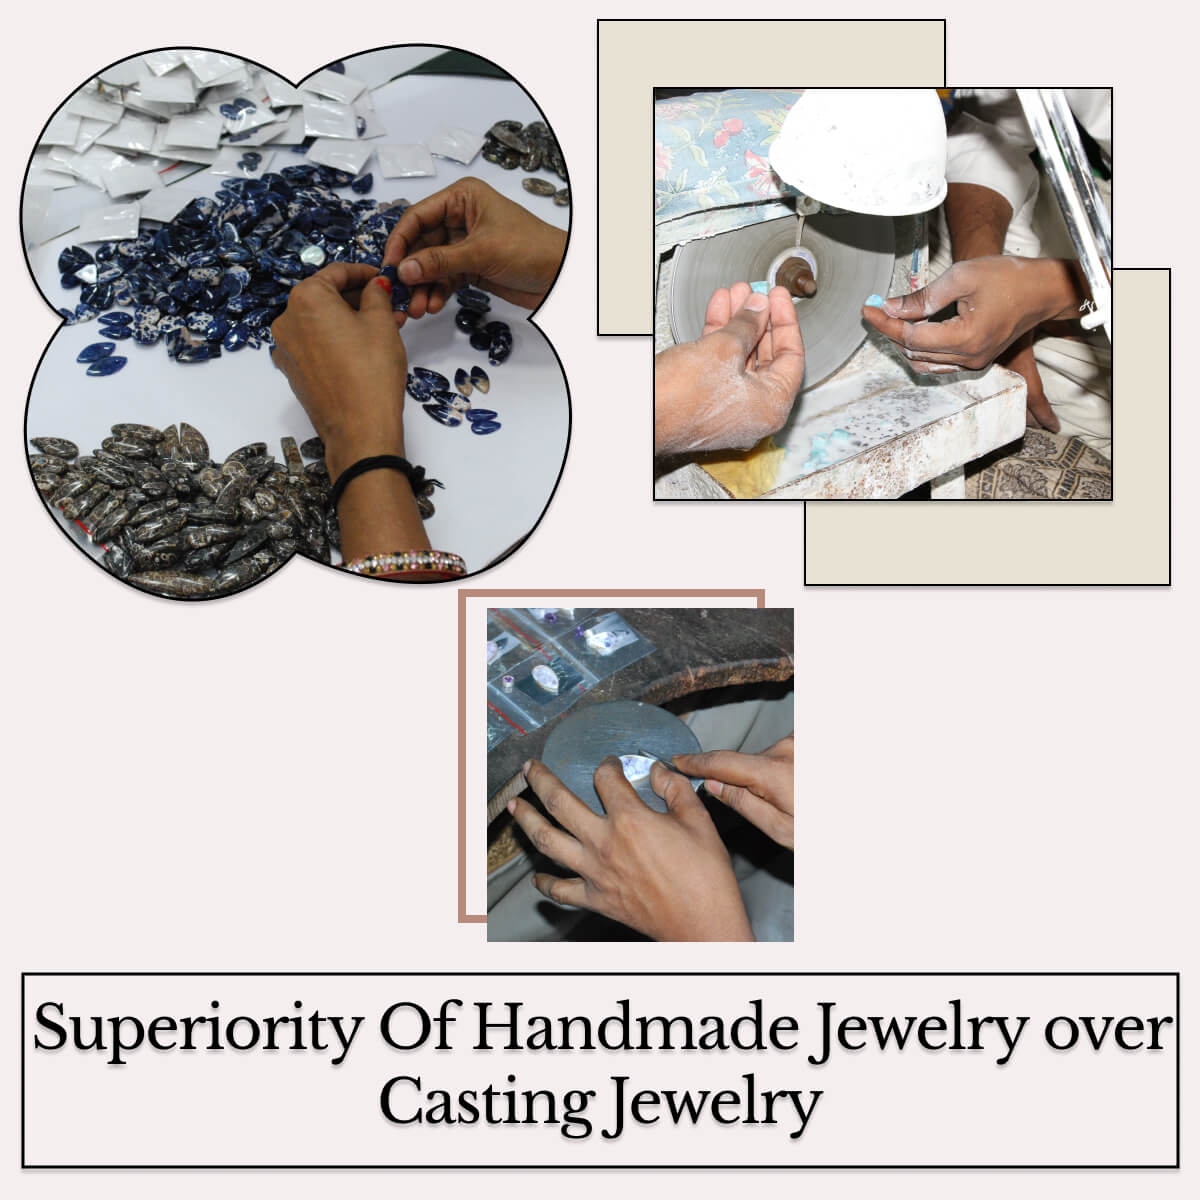 What Counts Handmade Jewelry Good Over Casting